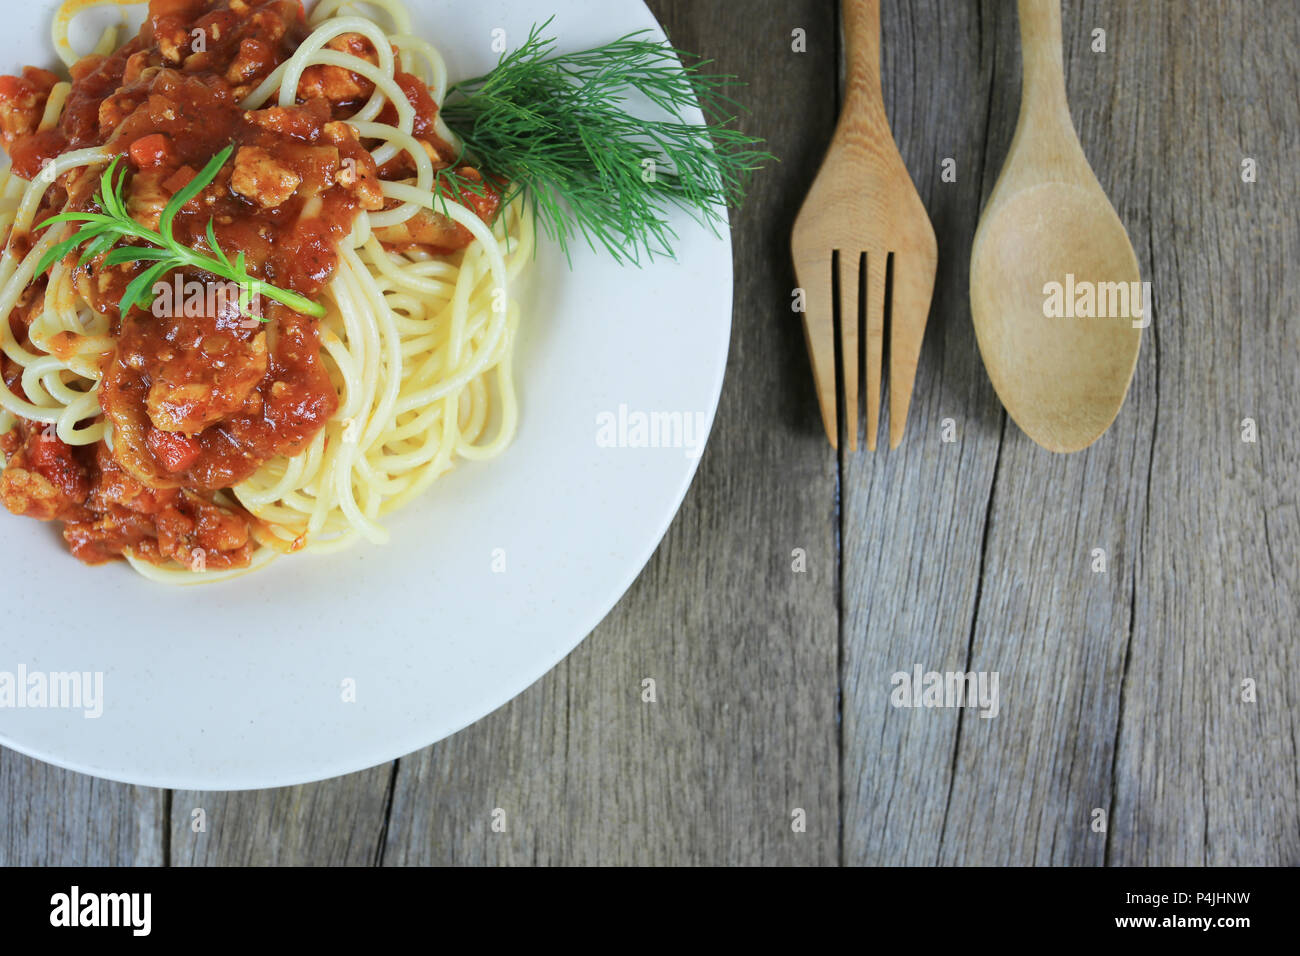 Spaghetti with tomato sauce in a white dish on wooden floor background and have copy space in concept of eating good food is health care. Stock Photo